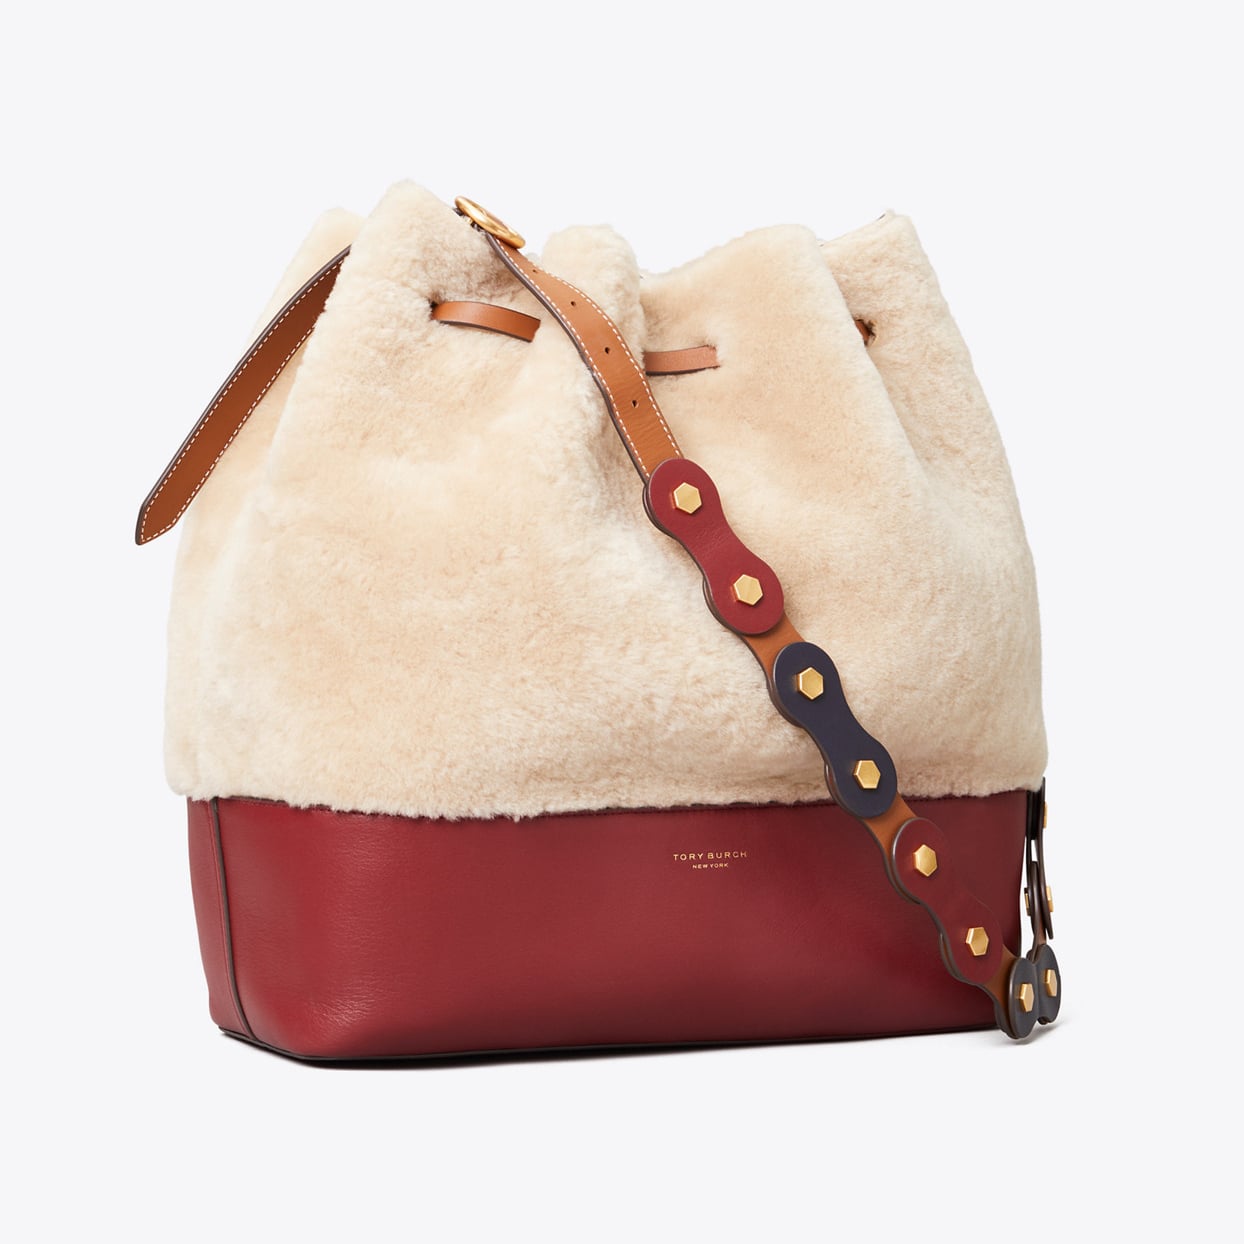 Tory Burch | 14 Shearling Bags So Cozy and Stylish, You'll Want to Wear  Them All Day, Then Cuddle All Night | POPSUGAR Fashion Photo 10